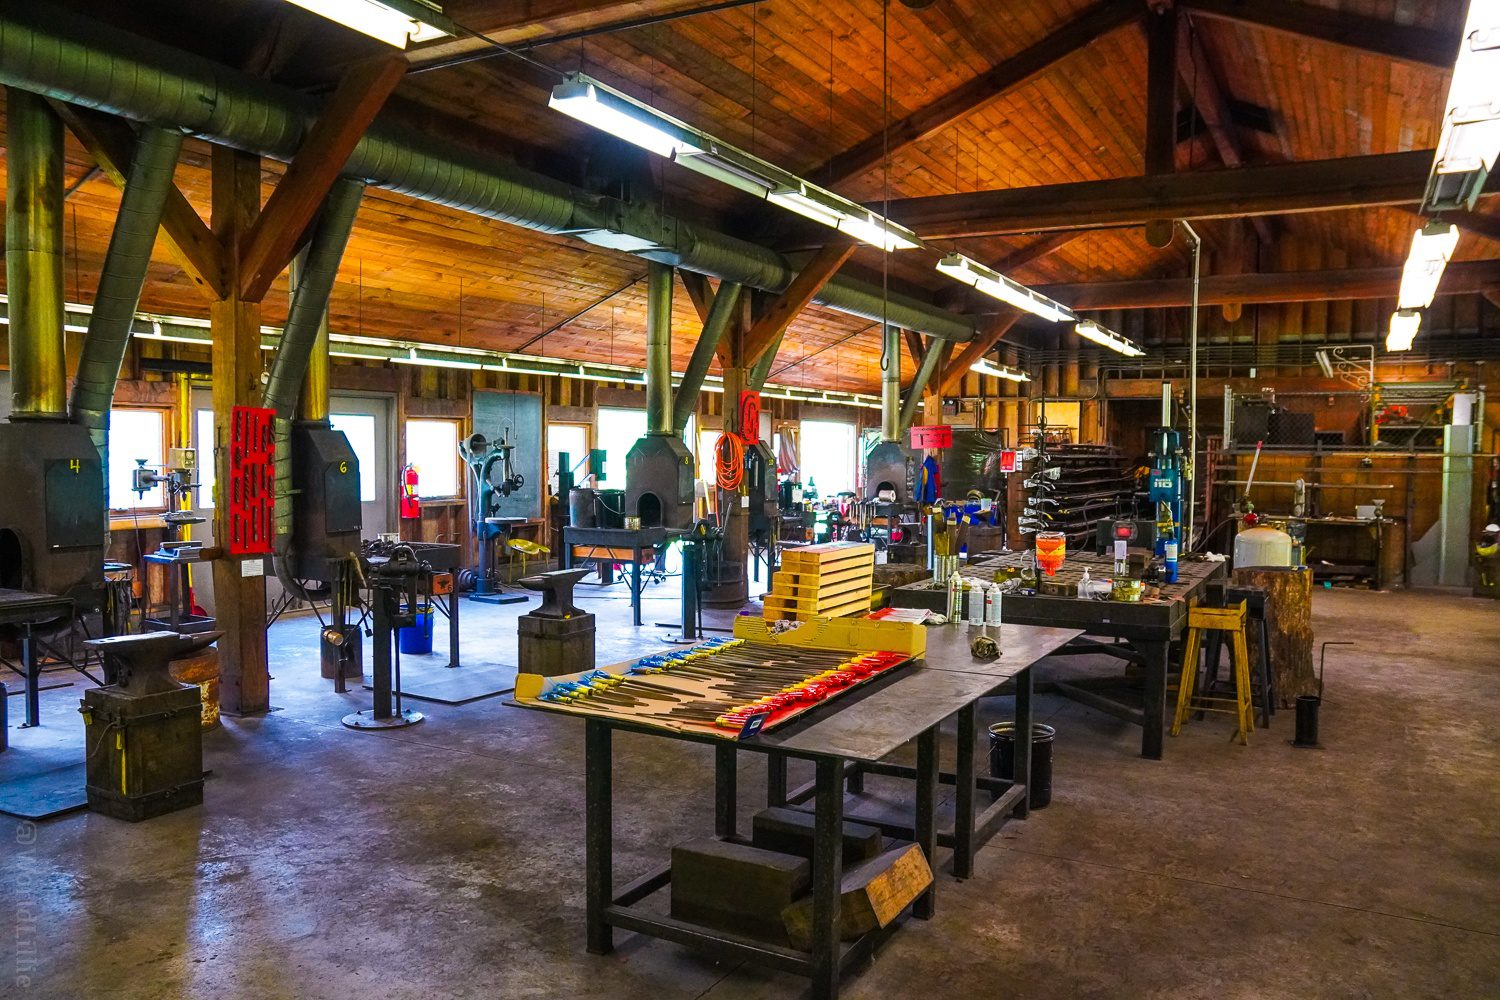 Check out this blacksmith workshop for classes!